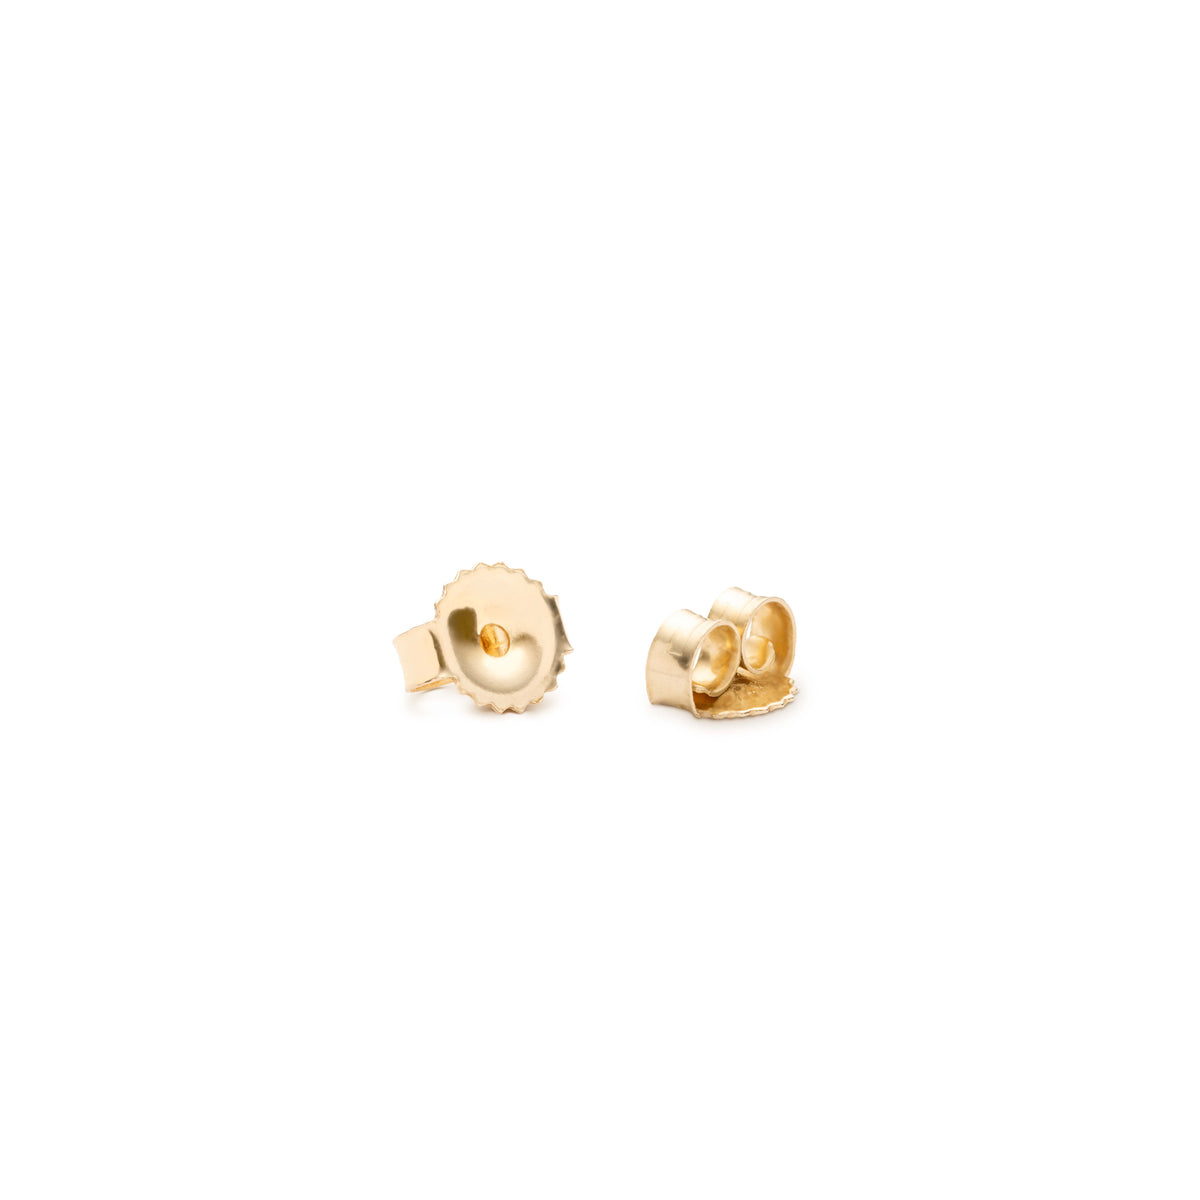 Providence Emerald Stud Earrings in 14k Gold (May)